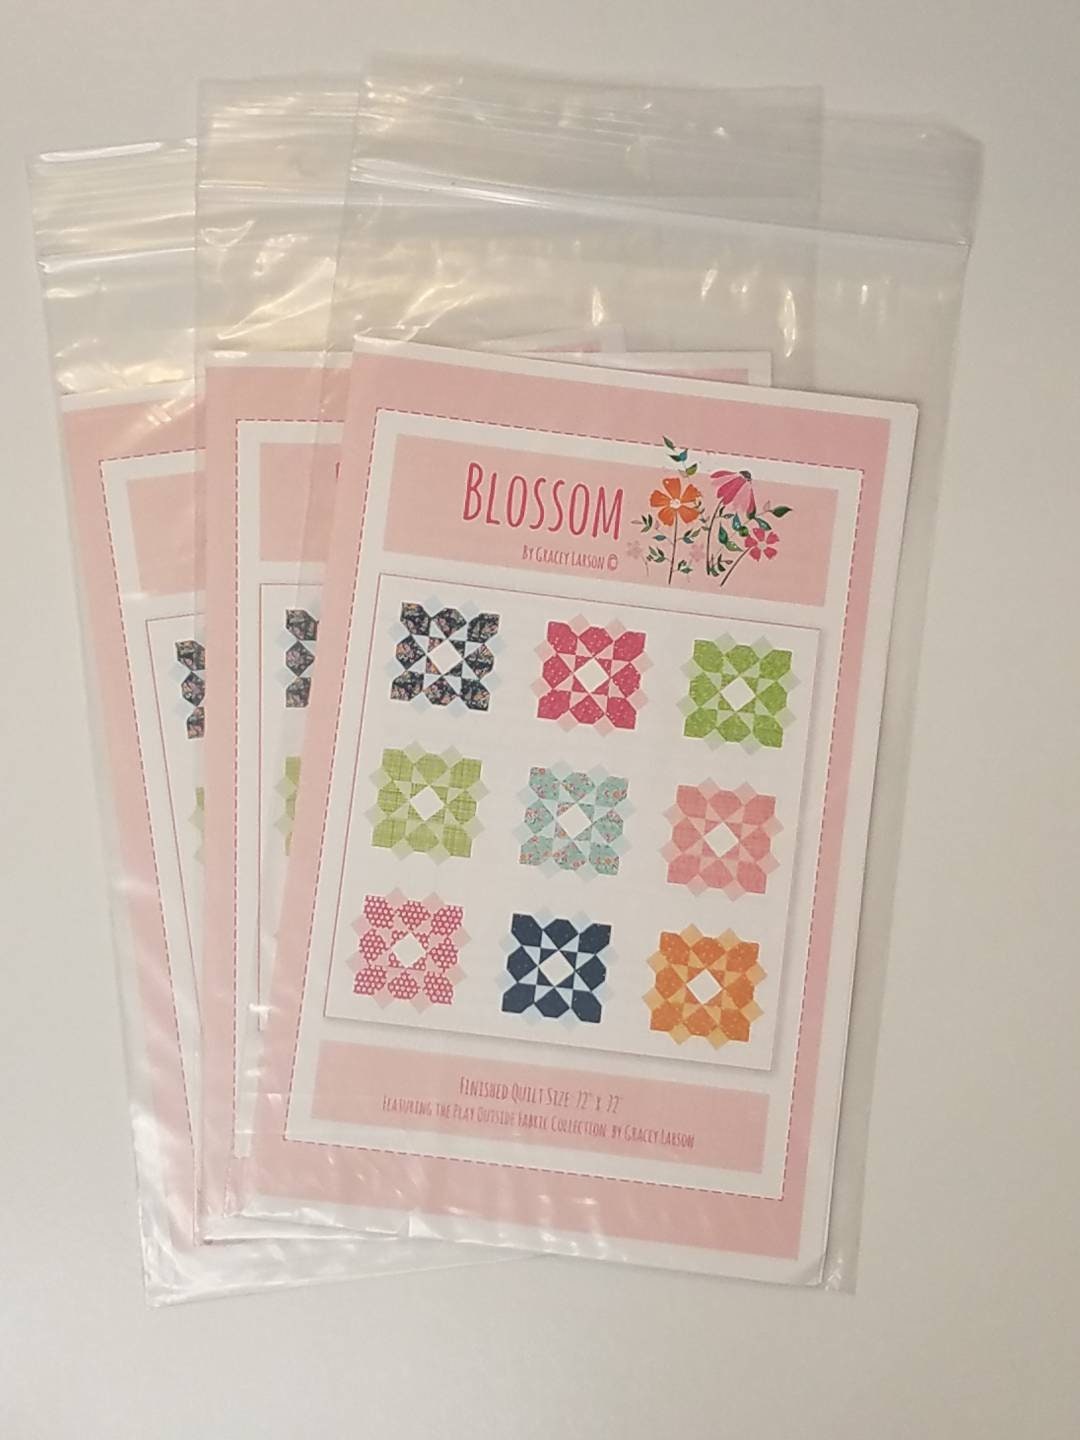 Blossom Quilt Pattern by Gracey Larson